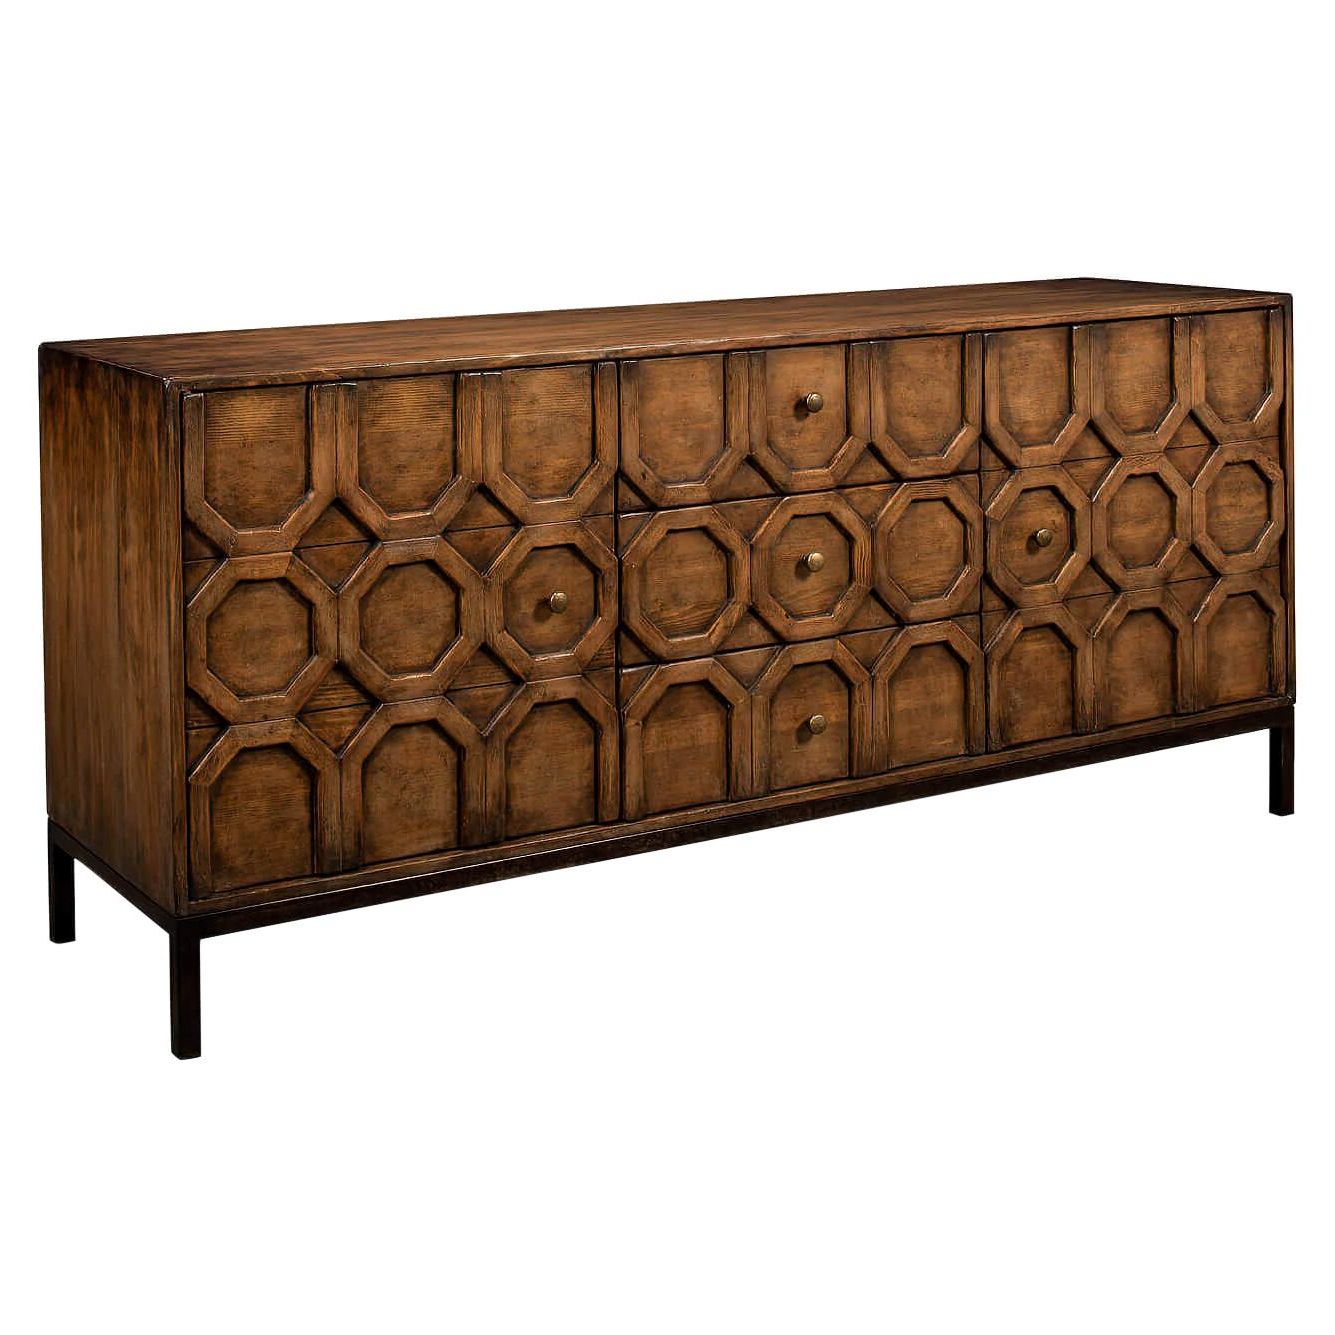 Modern Geometric Sideboard For Sale At 1stdibs | Geometric Buffet Cabinet, Sideboard  Geometric, Modern Sideboard Within Geometric Sideboards (Gallery 4 of 20)